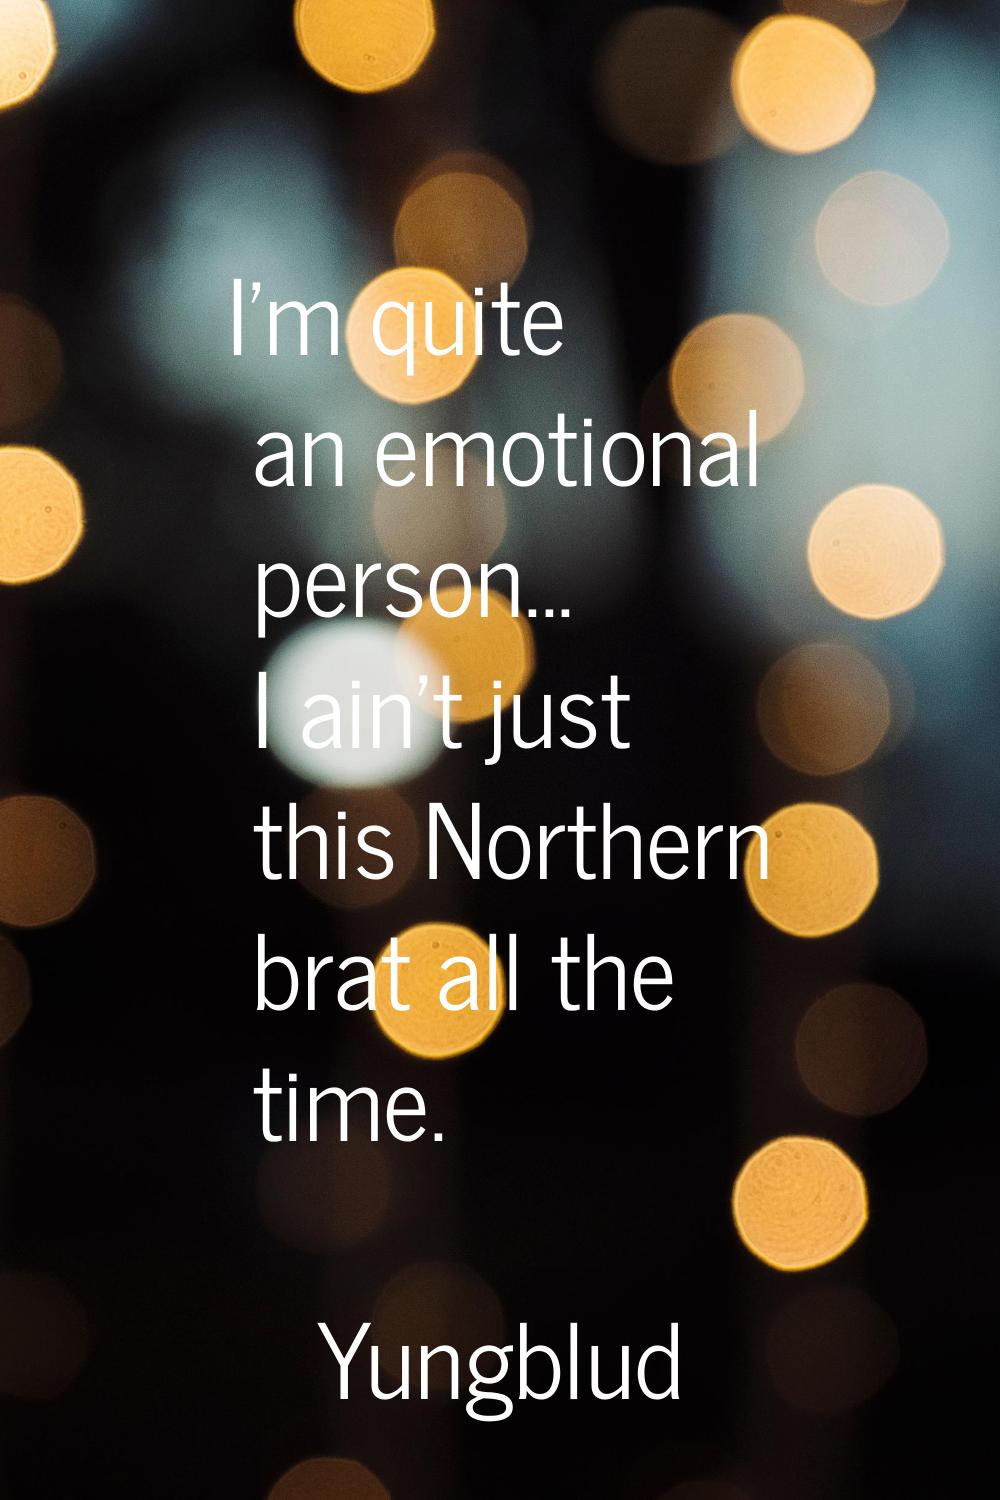 I'm quite an emotional person... I ain't just this Northern brat all the time.